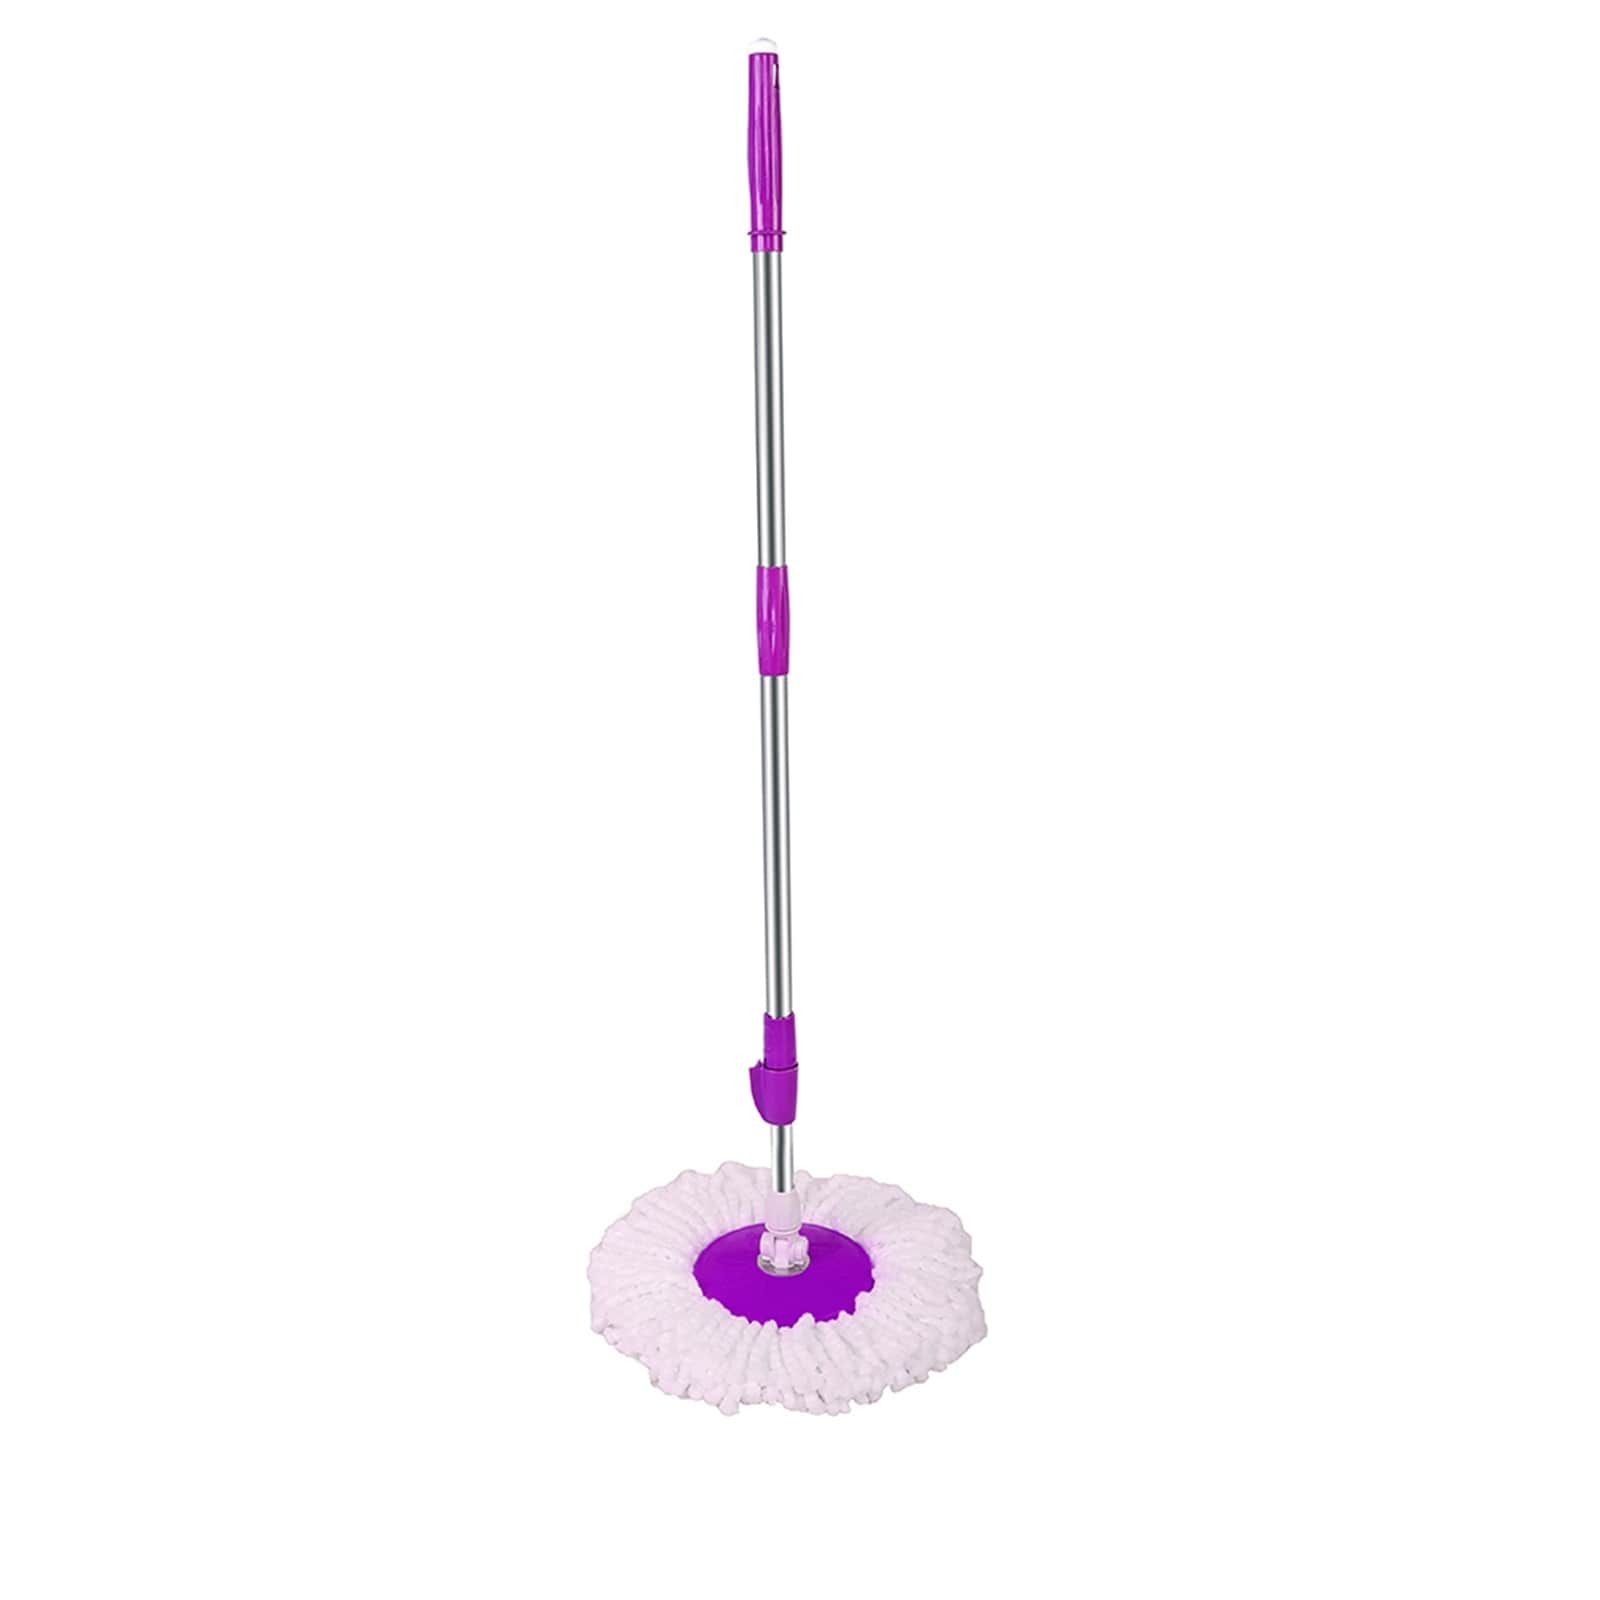 https://ak1.ostkcdn.com/images/products/is/images/direct/f620dd96c14b69ea8cd972f93e7fe5e3345489de/360%C2%B0-Spin-Mop-with-Bucket-%26-Dual-Mop-Heads.jpg